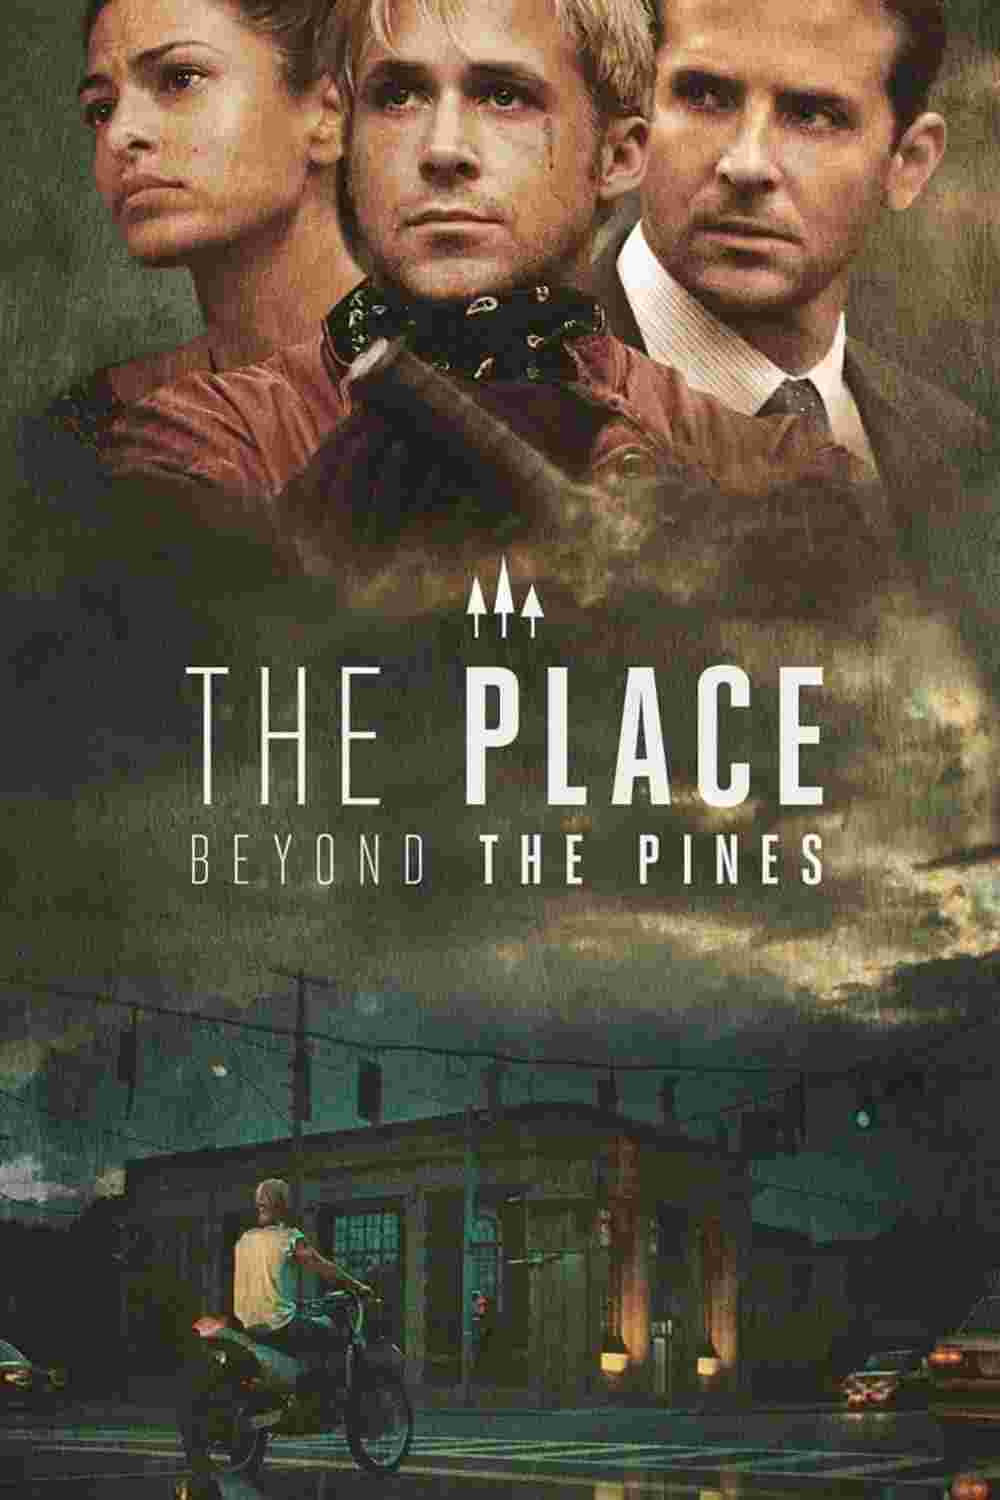 The Place Beyond the Pines (2012) Ryan Gosling